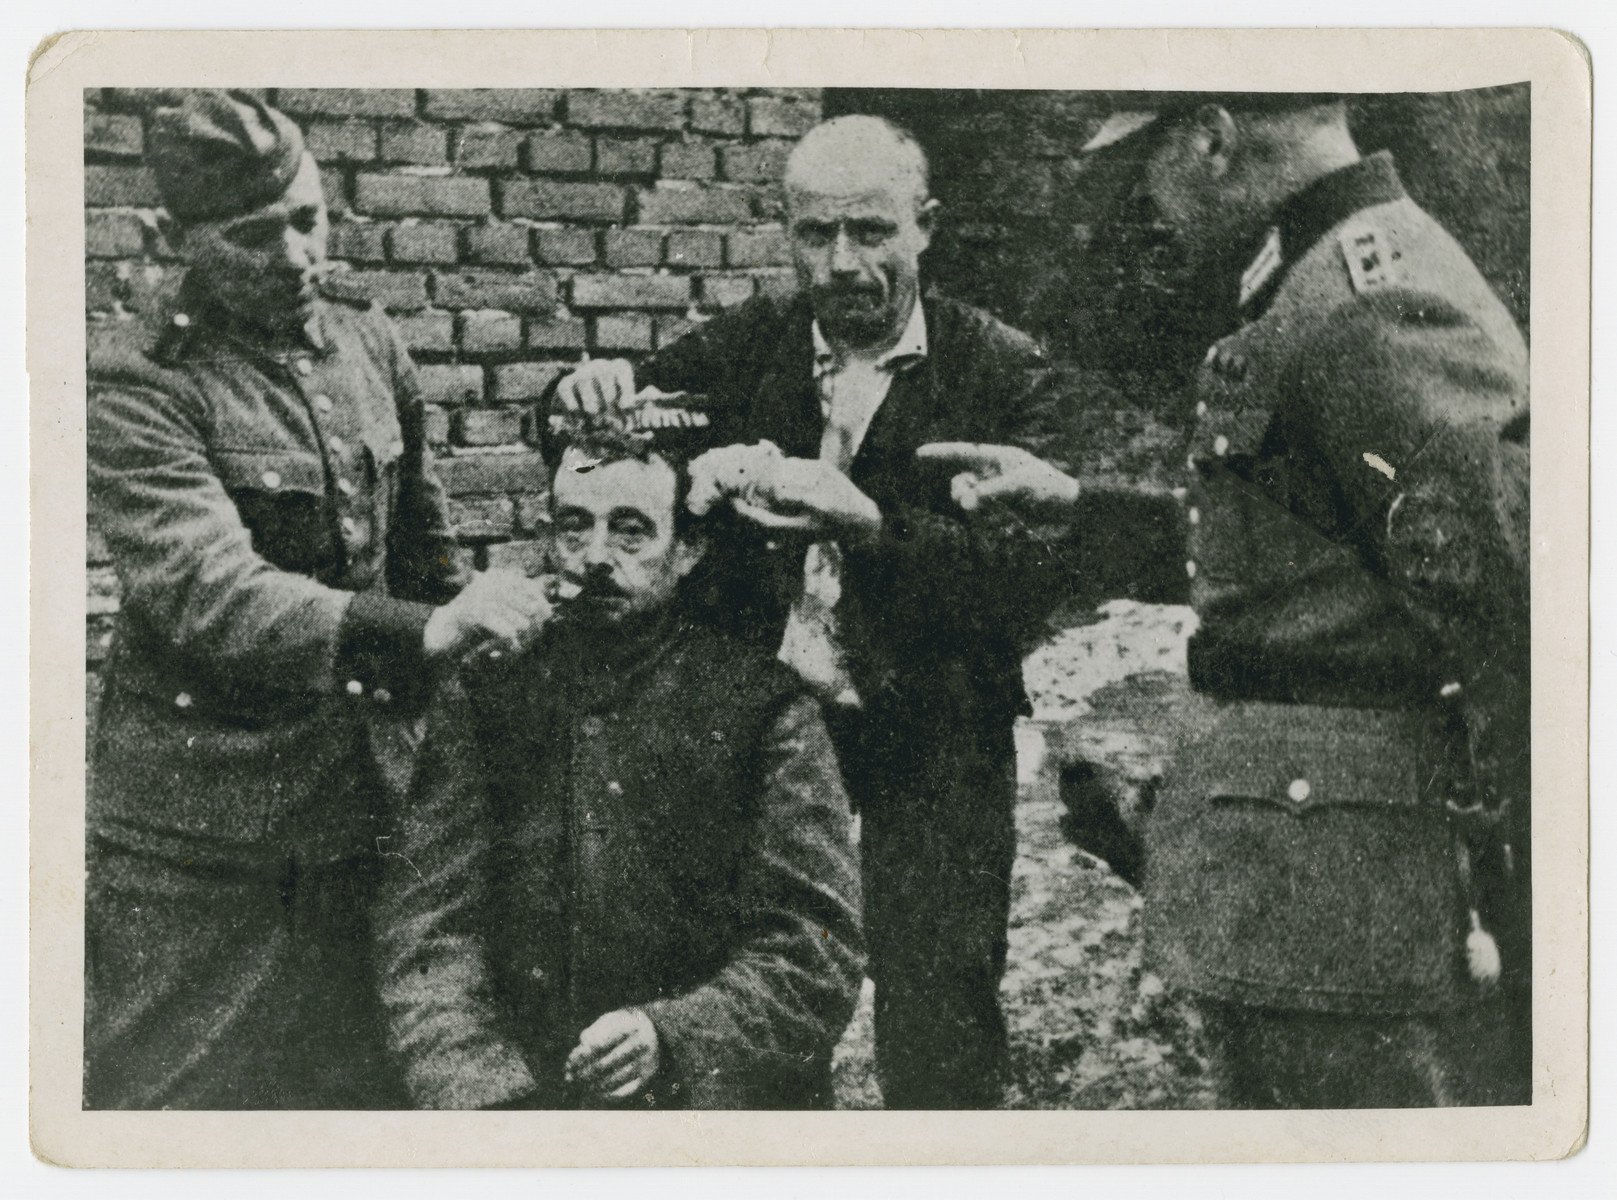 German soldiers force a man to shave the beard and hair of another [probably a religious Jew] in an act of public humiliation.